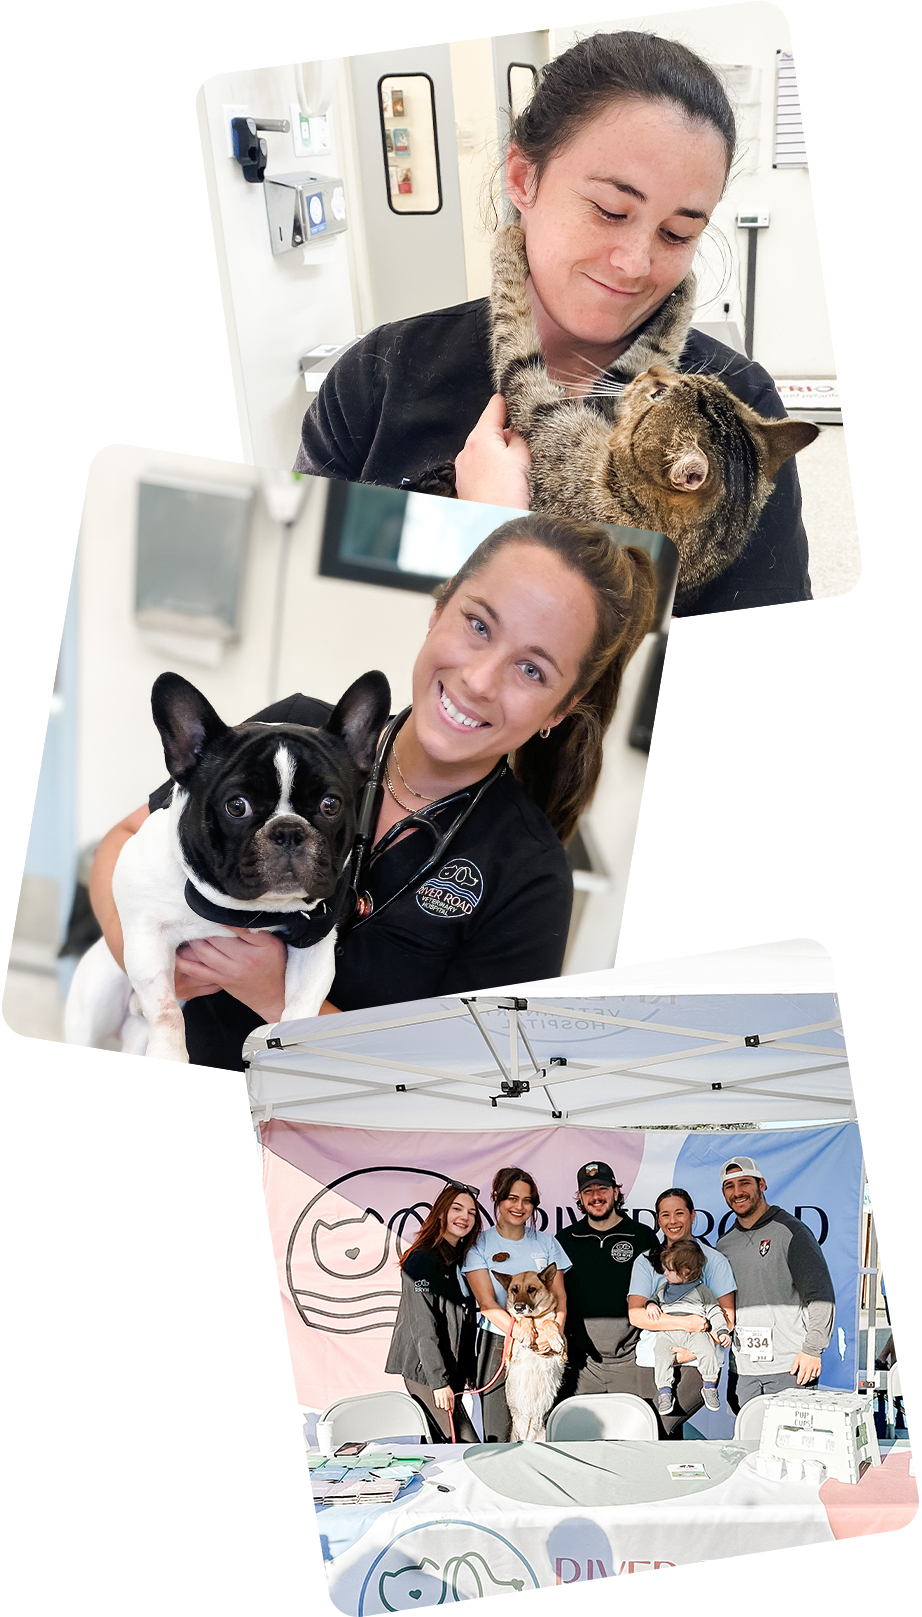 Three pictures. One of a woman holding a cat, one of a woman holding a dog, and one of five people in a booth, one of them holding a dog and one of them holding a baby